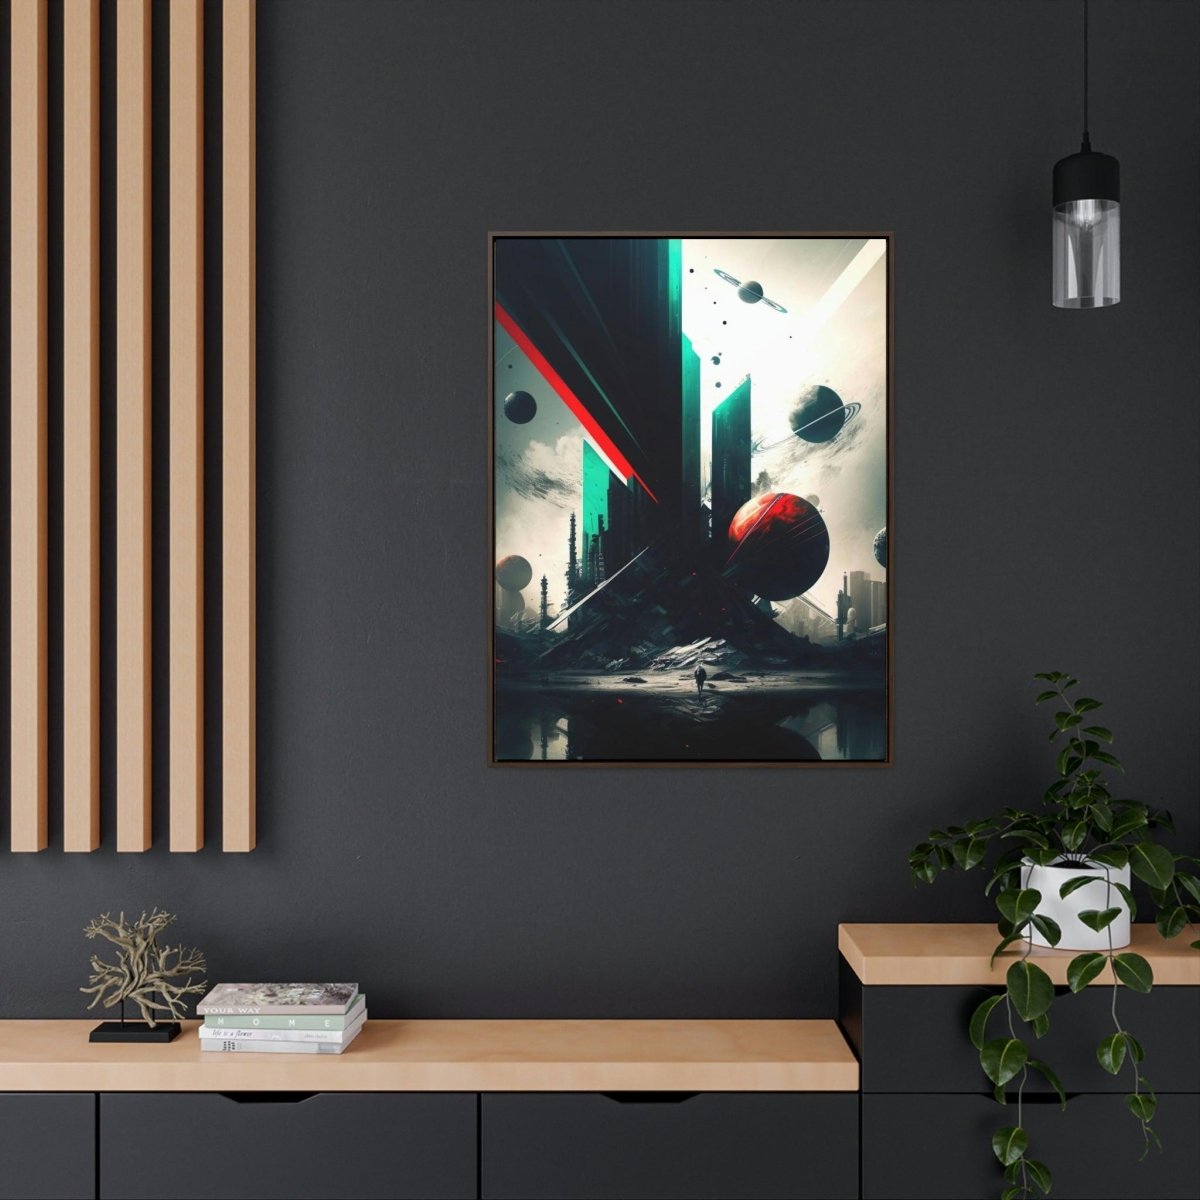 Metropolis Futuristic City On A Planet Surrounded By Planets- Digital Art Framed - HigherFrequencies